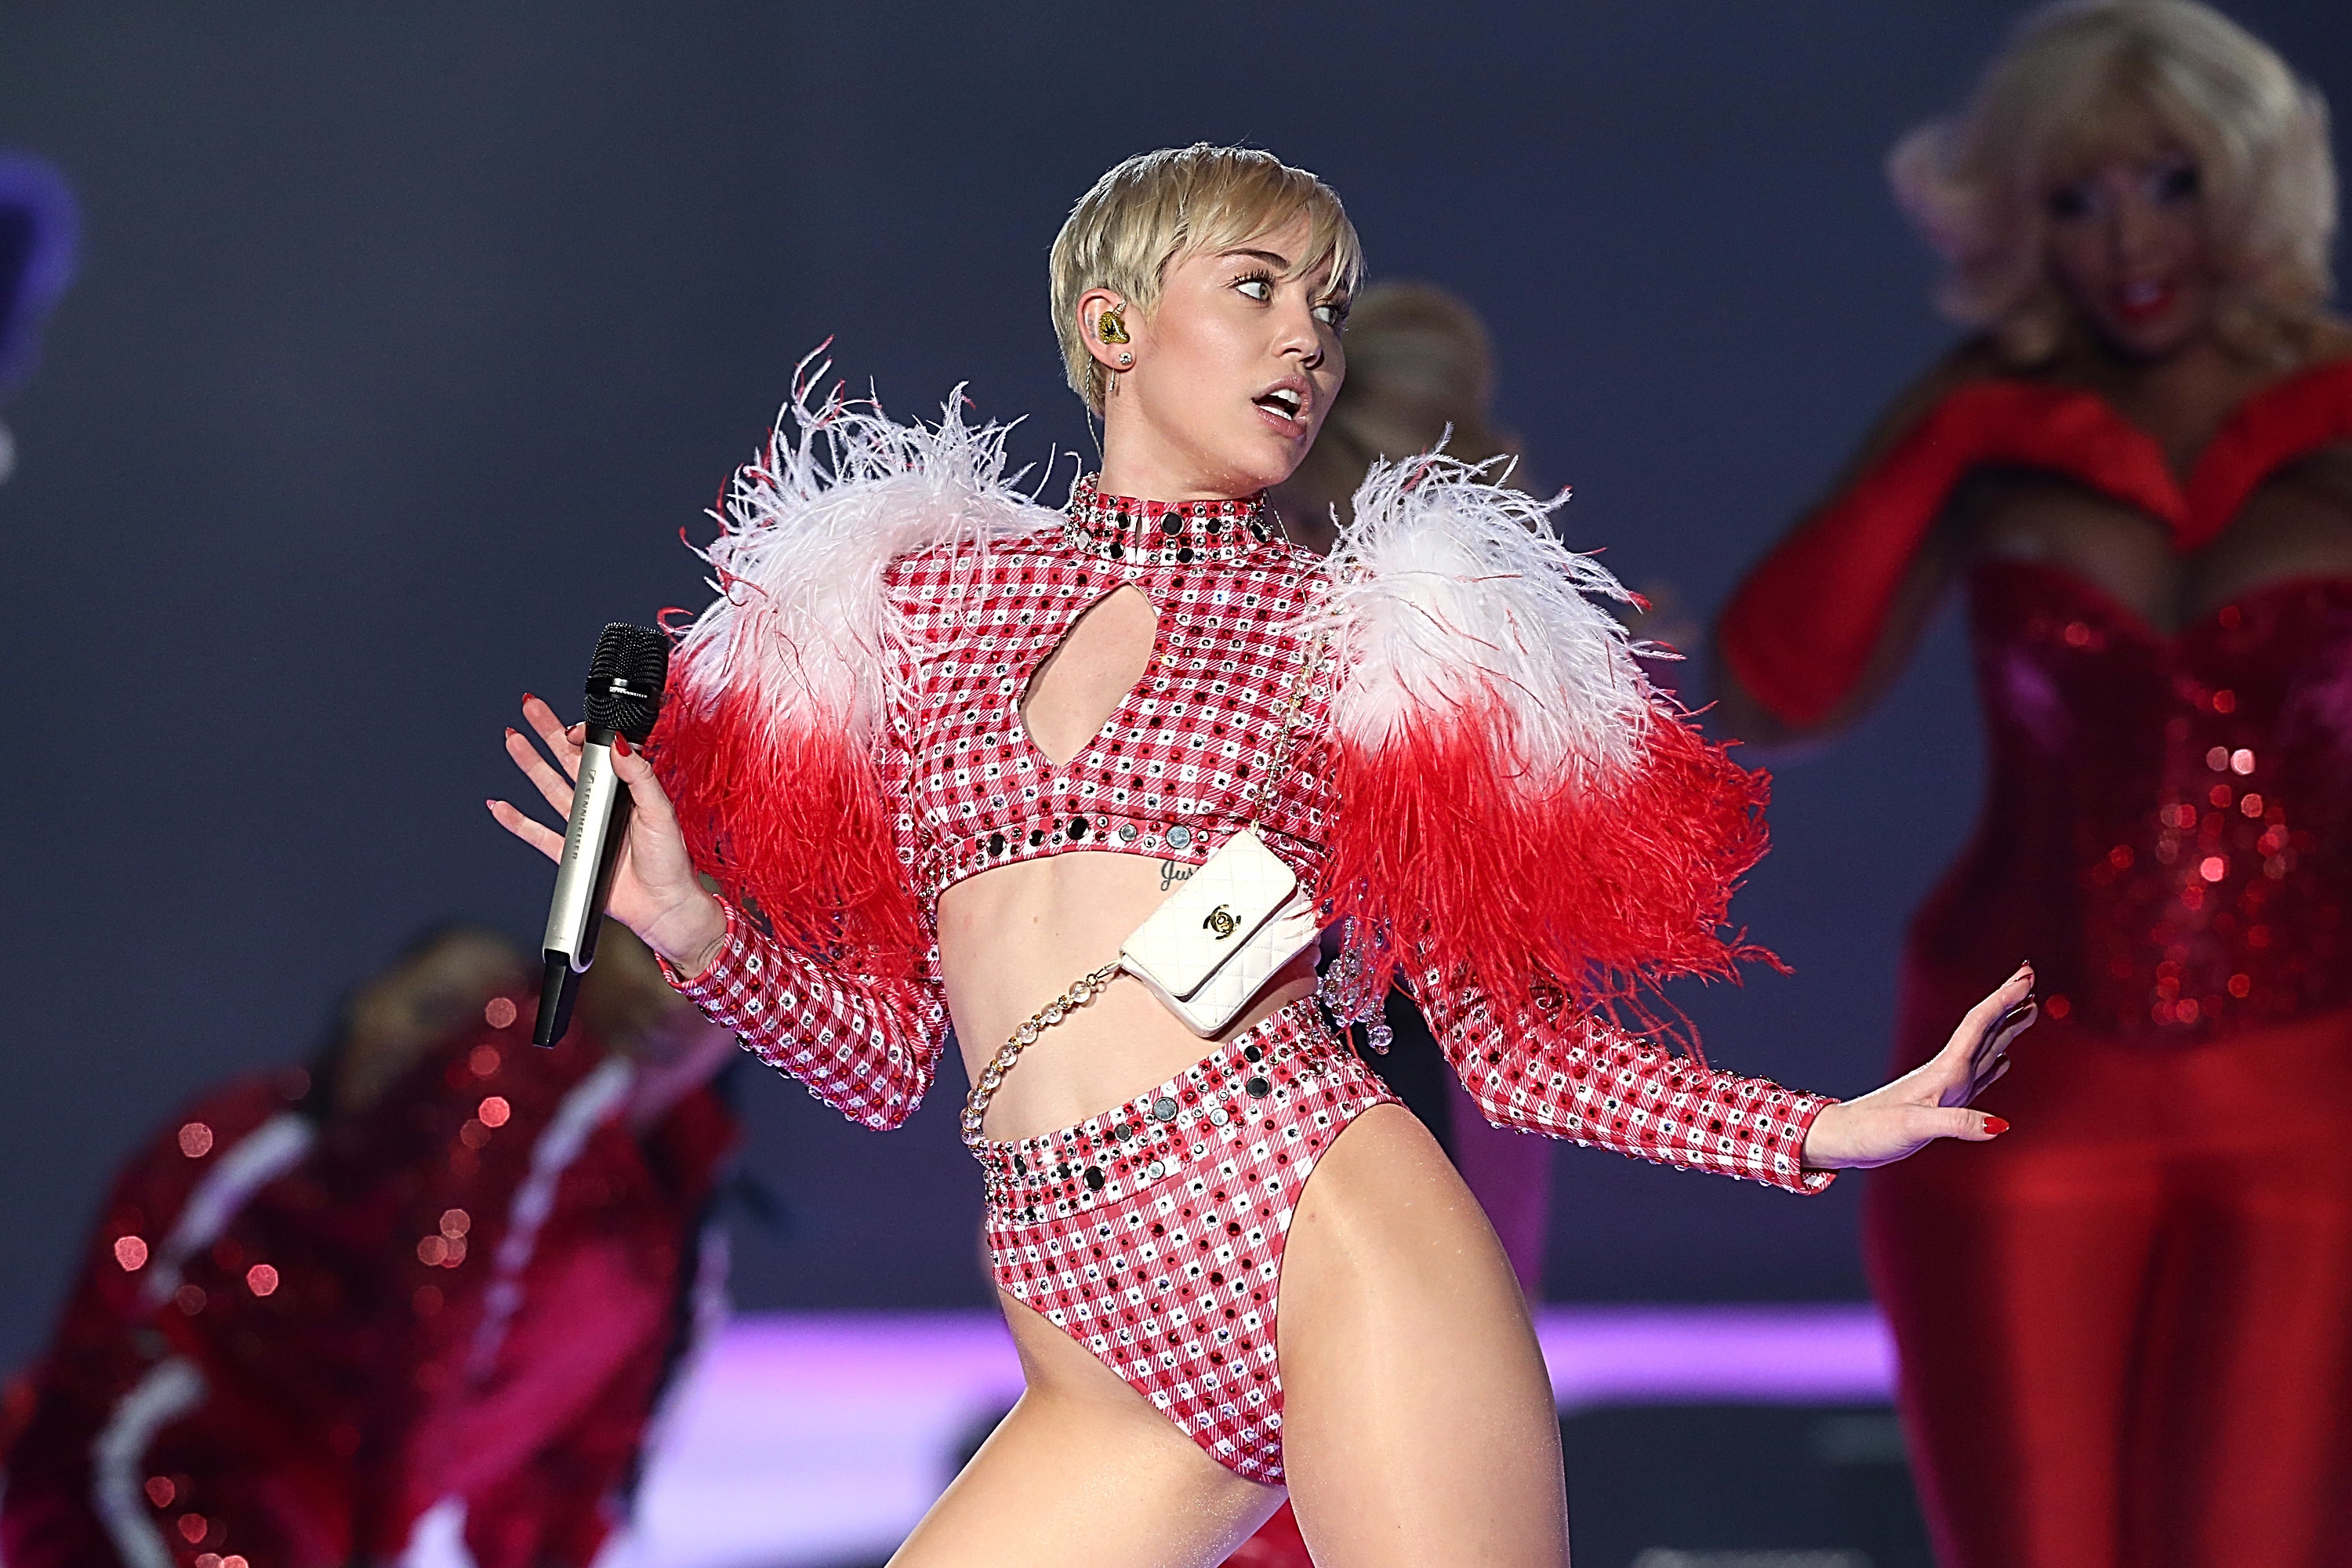 miley dancing on stage